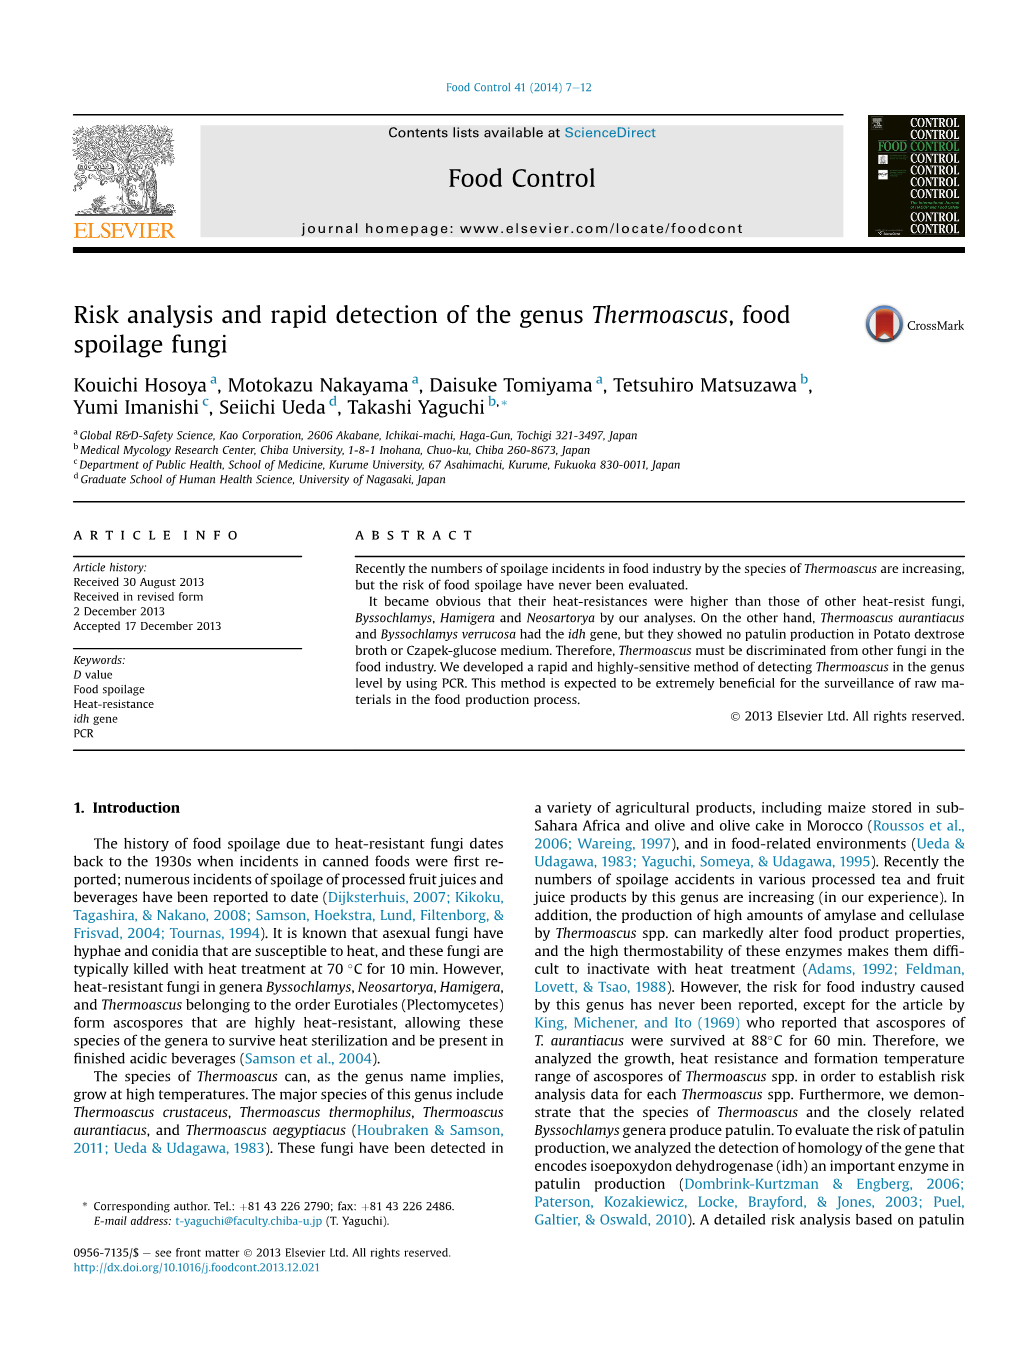 Risk Analysis and Rapid Detection of the Genus Thermoascus, Food Spoilage Fungi